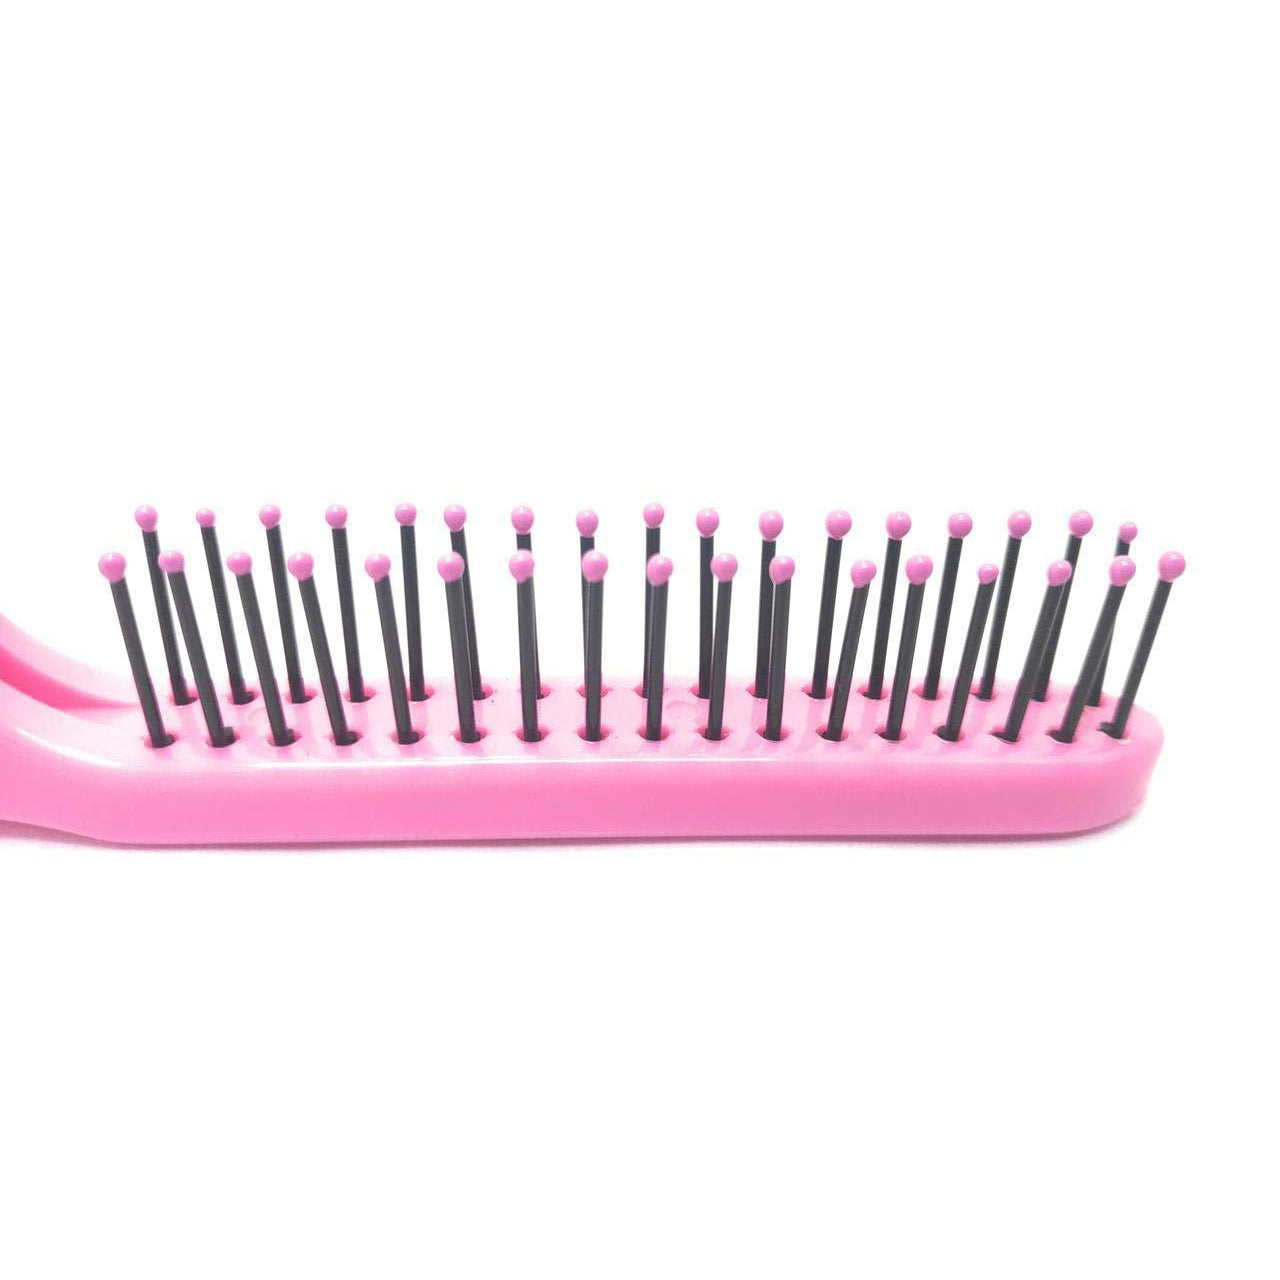 scarlet line slc009 compact travel friendly folding pocket comb double sided portable mini pocket hair brush foldable pocket kangi for hair styling pink hair combs 21 3x2 5x1 5 cm 3